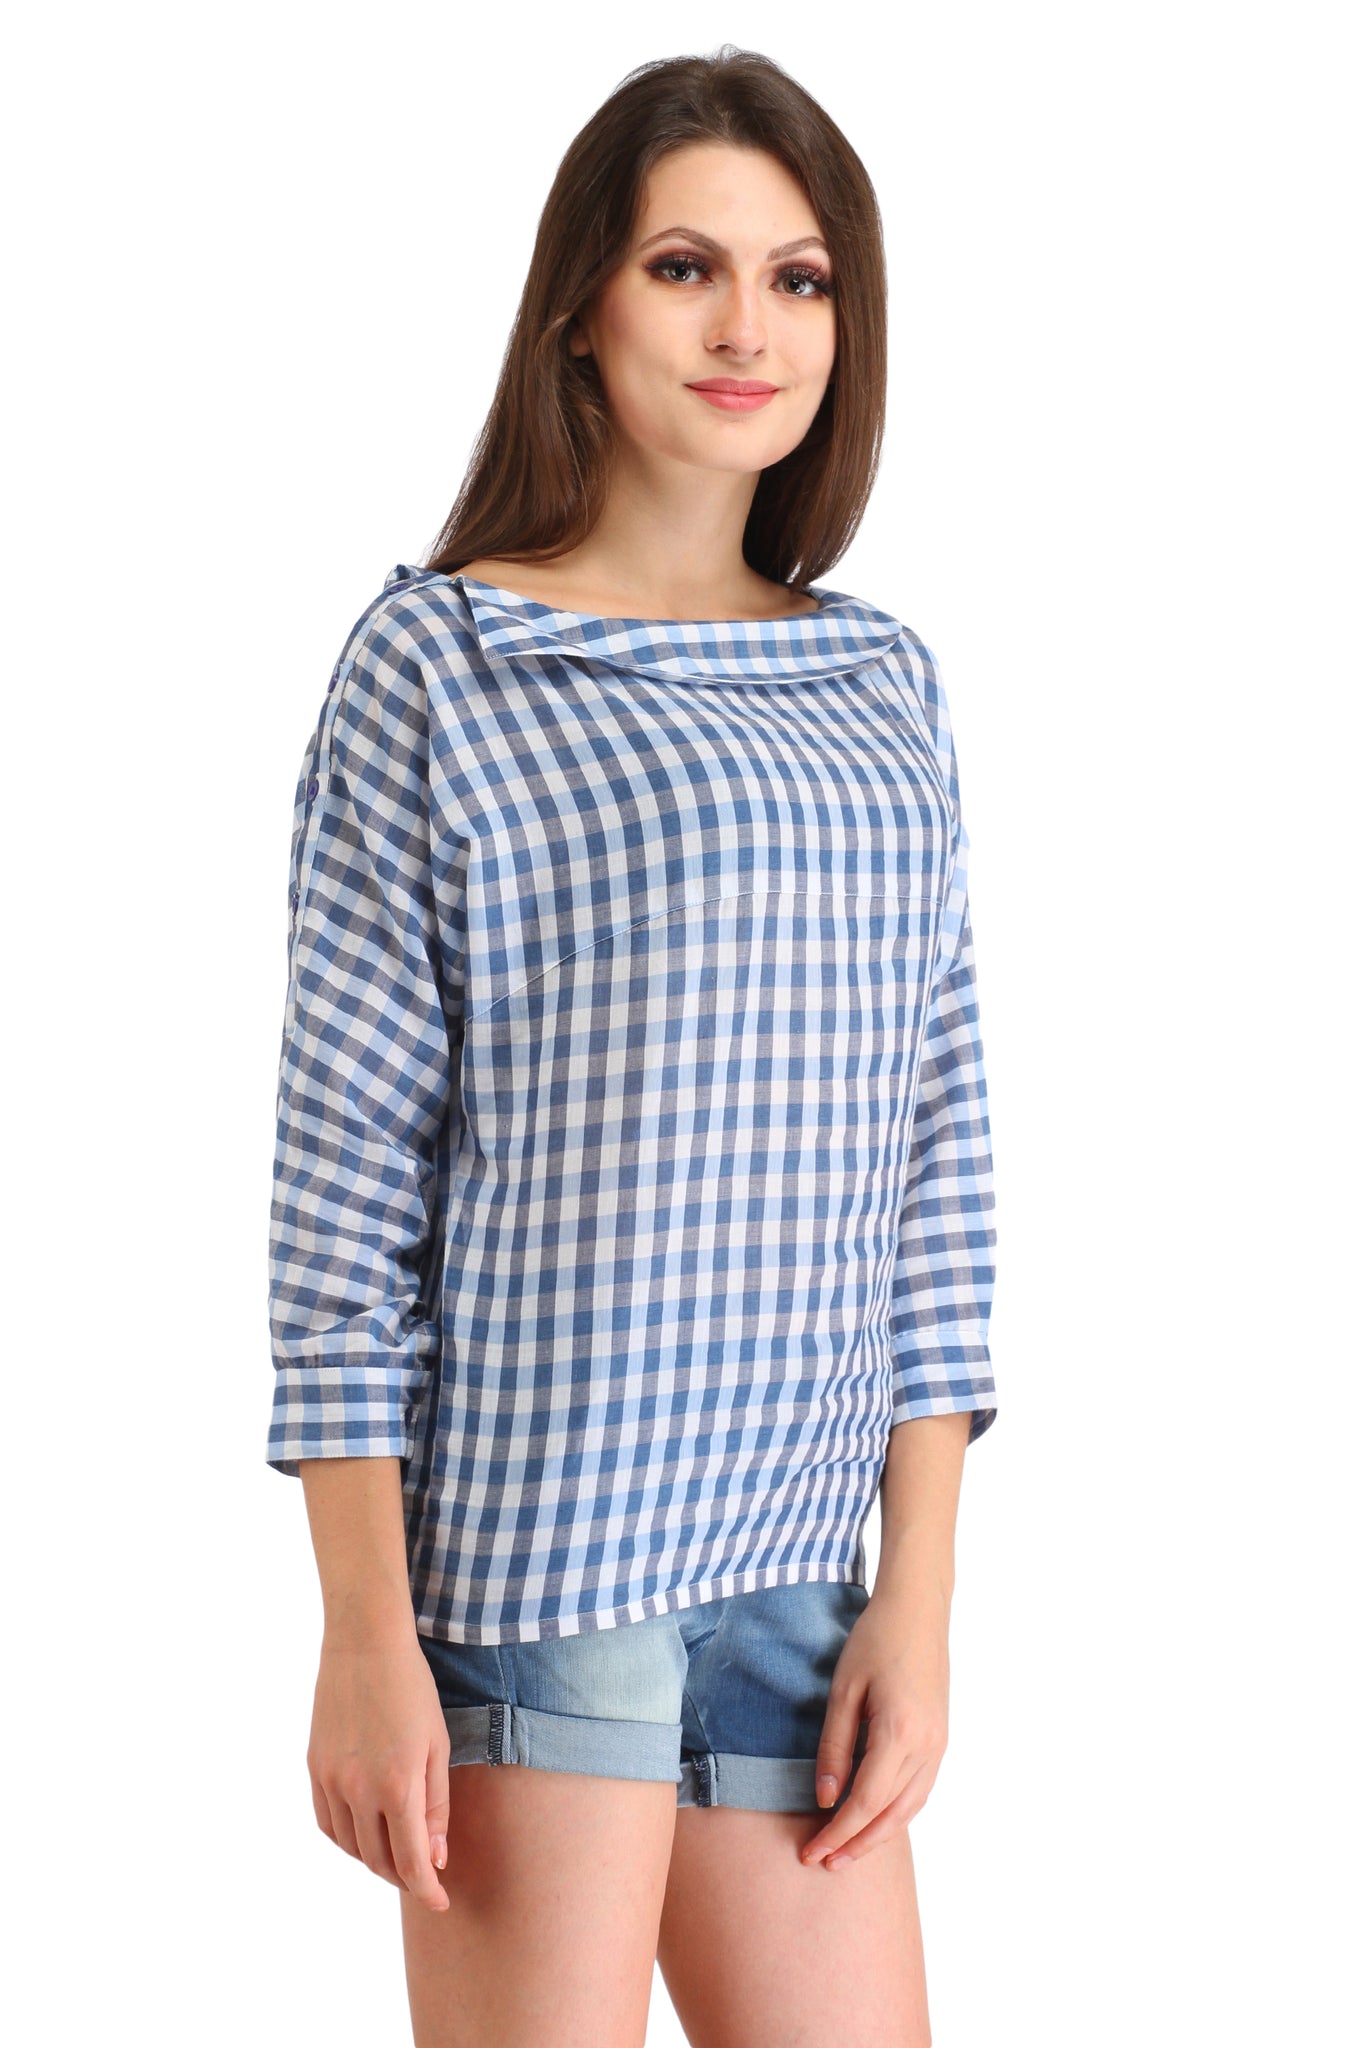 Cation Blue Checkered Top